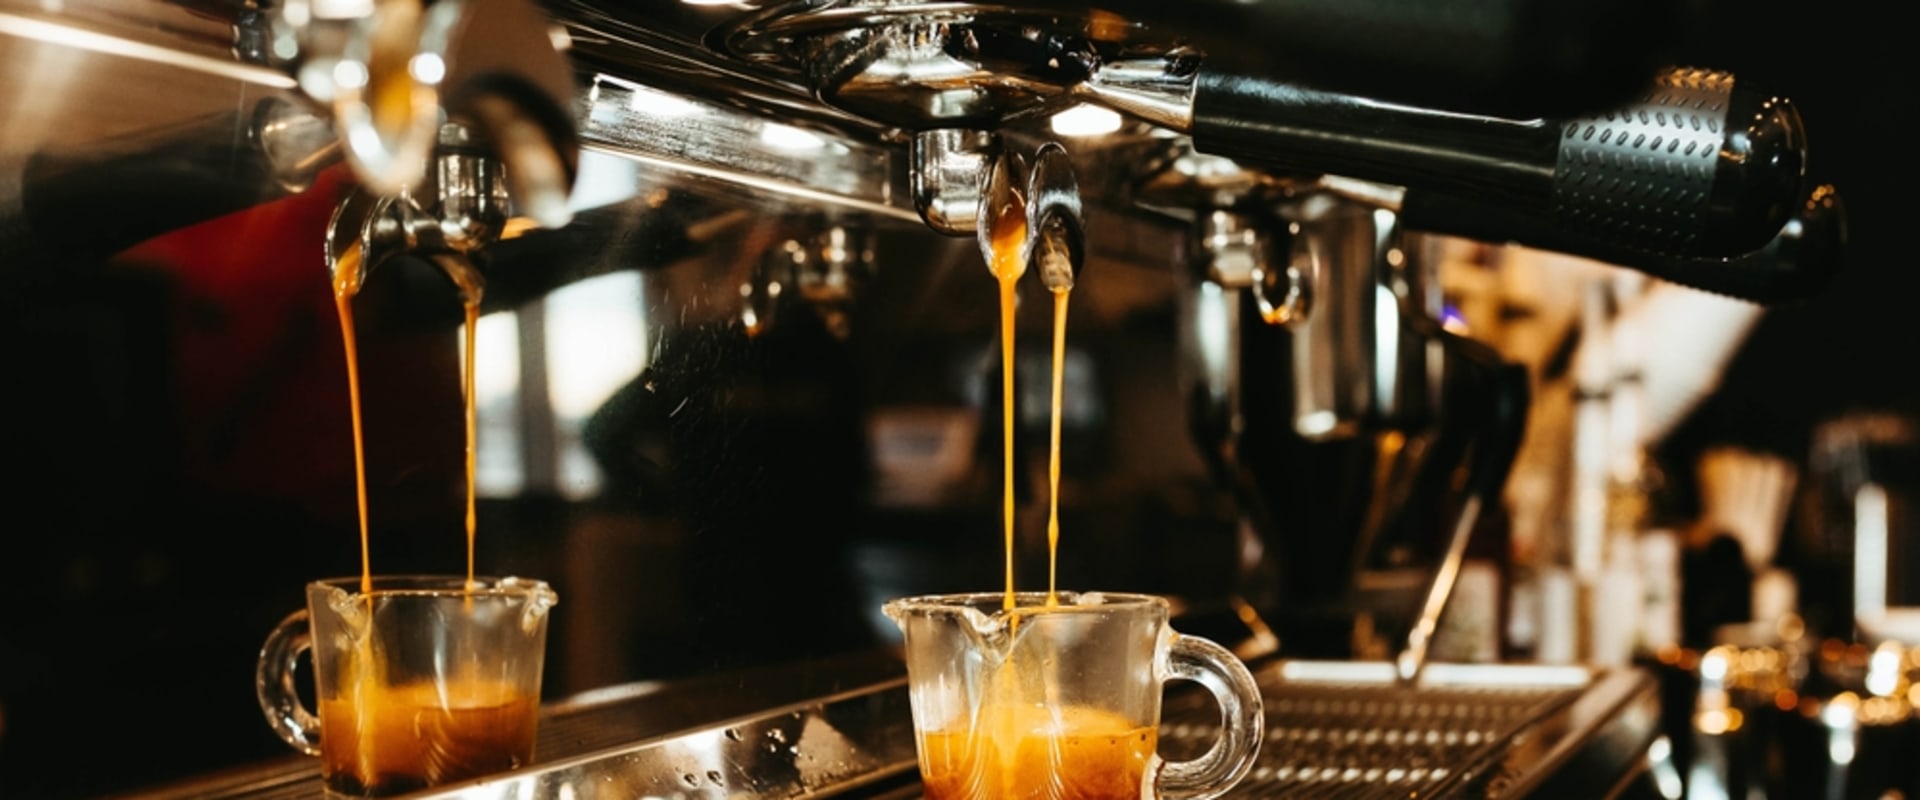 From Beans To Brews: Navigating Plano's Coffee Shops And Brewery Tours